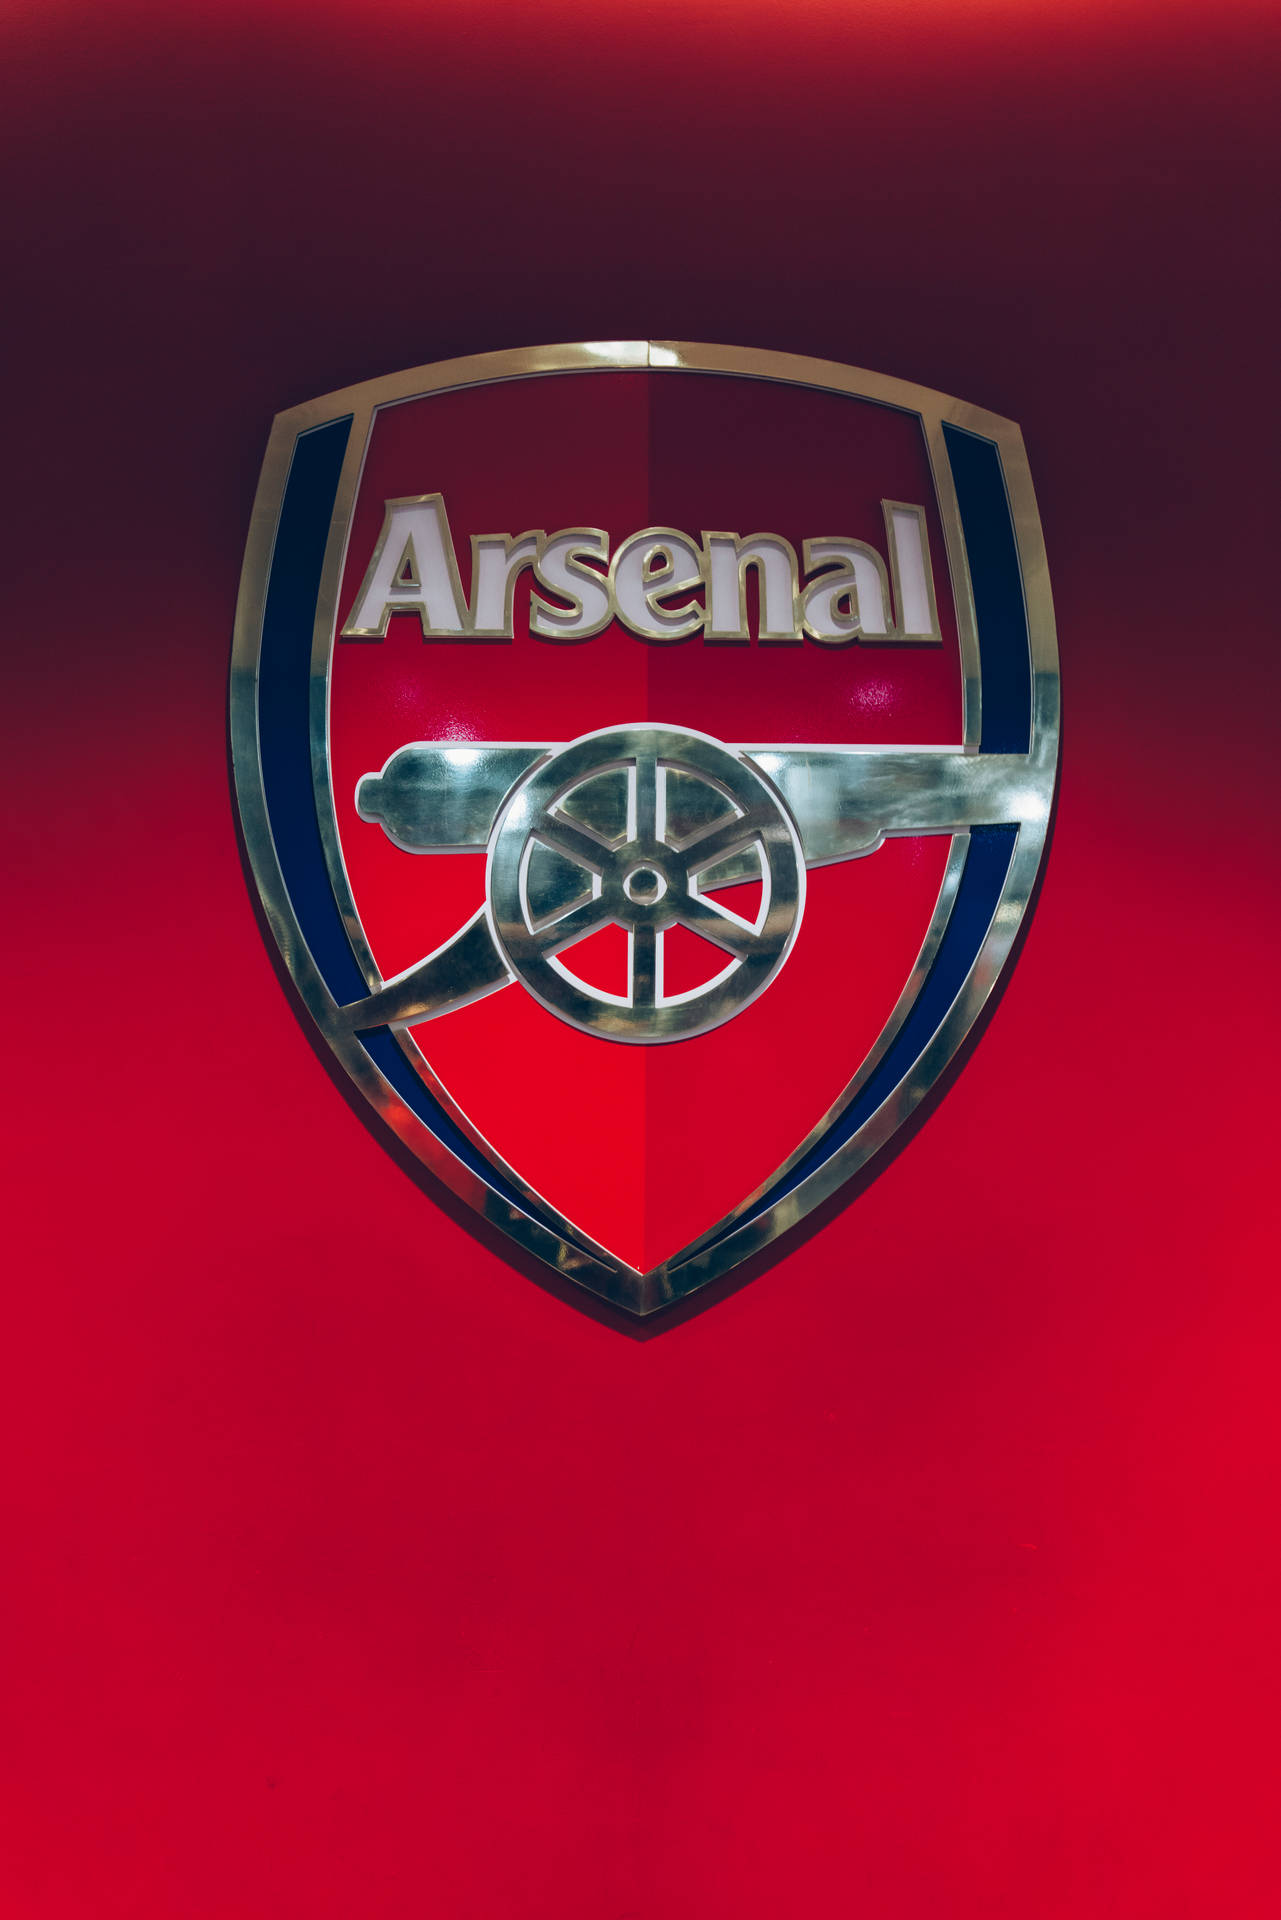 5304X7952 Arsenal Wallpaper and Background